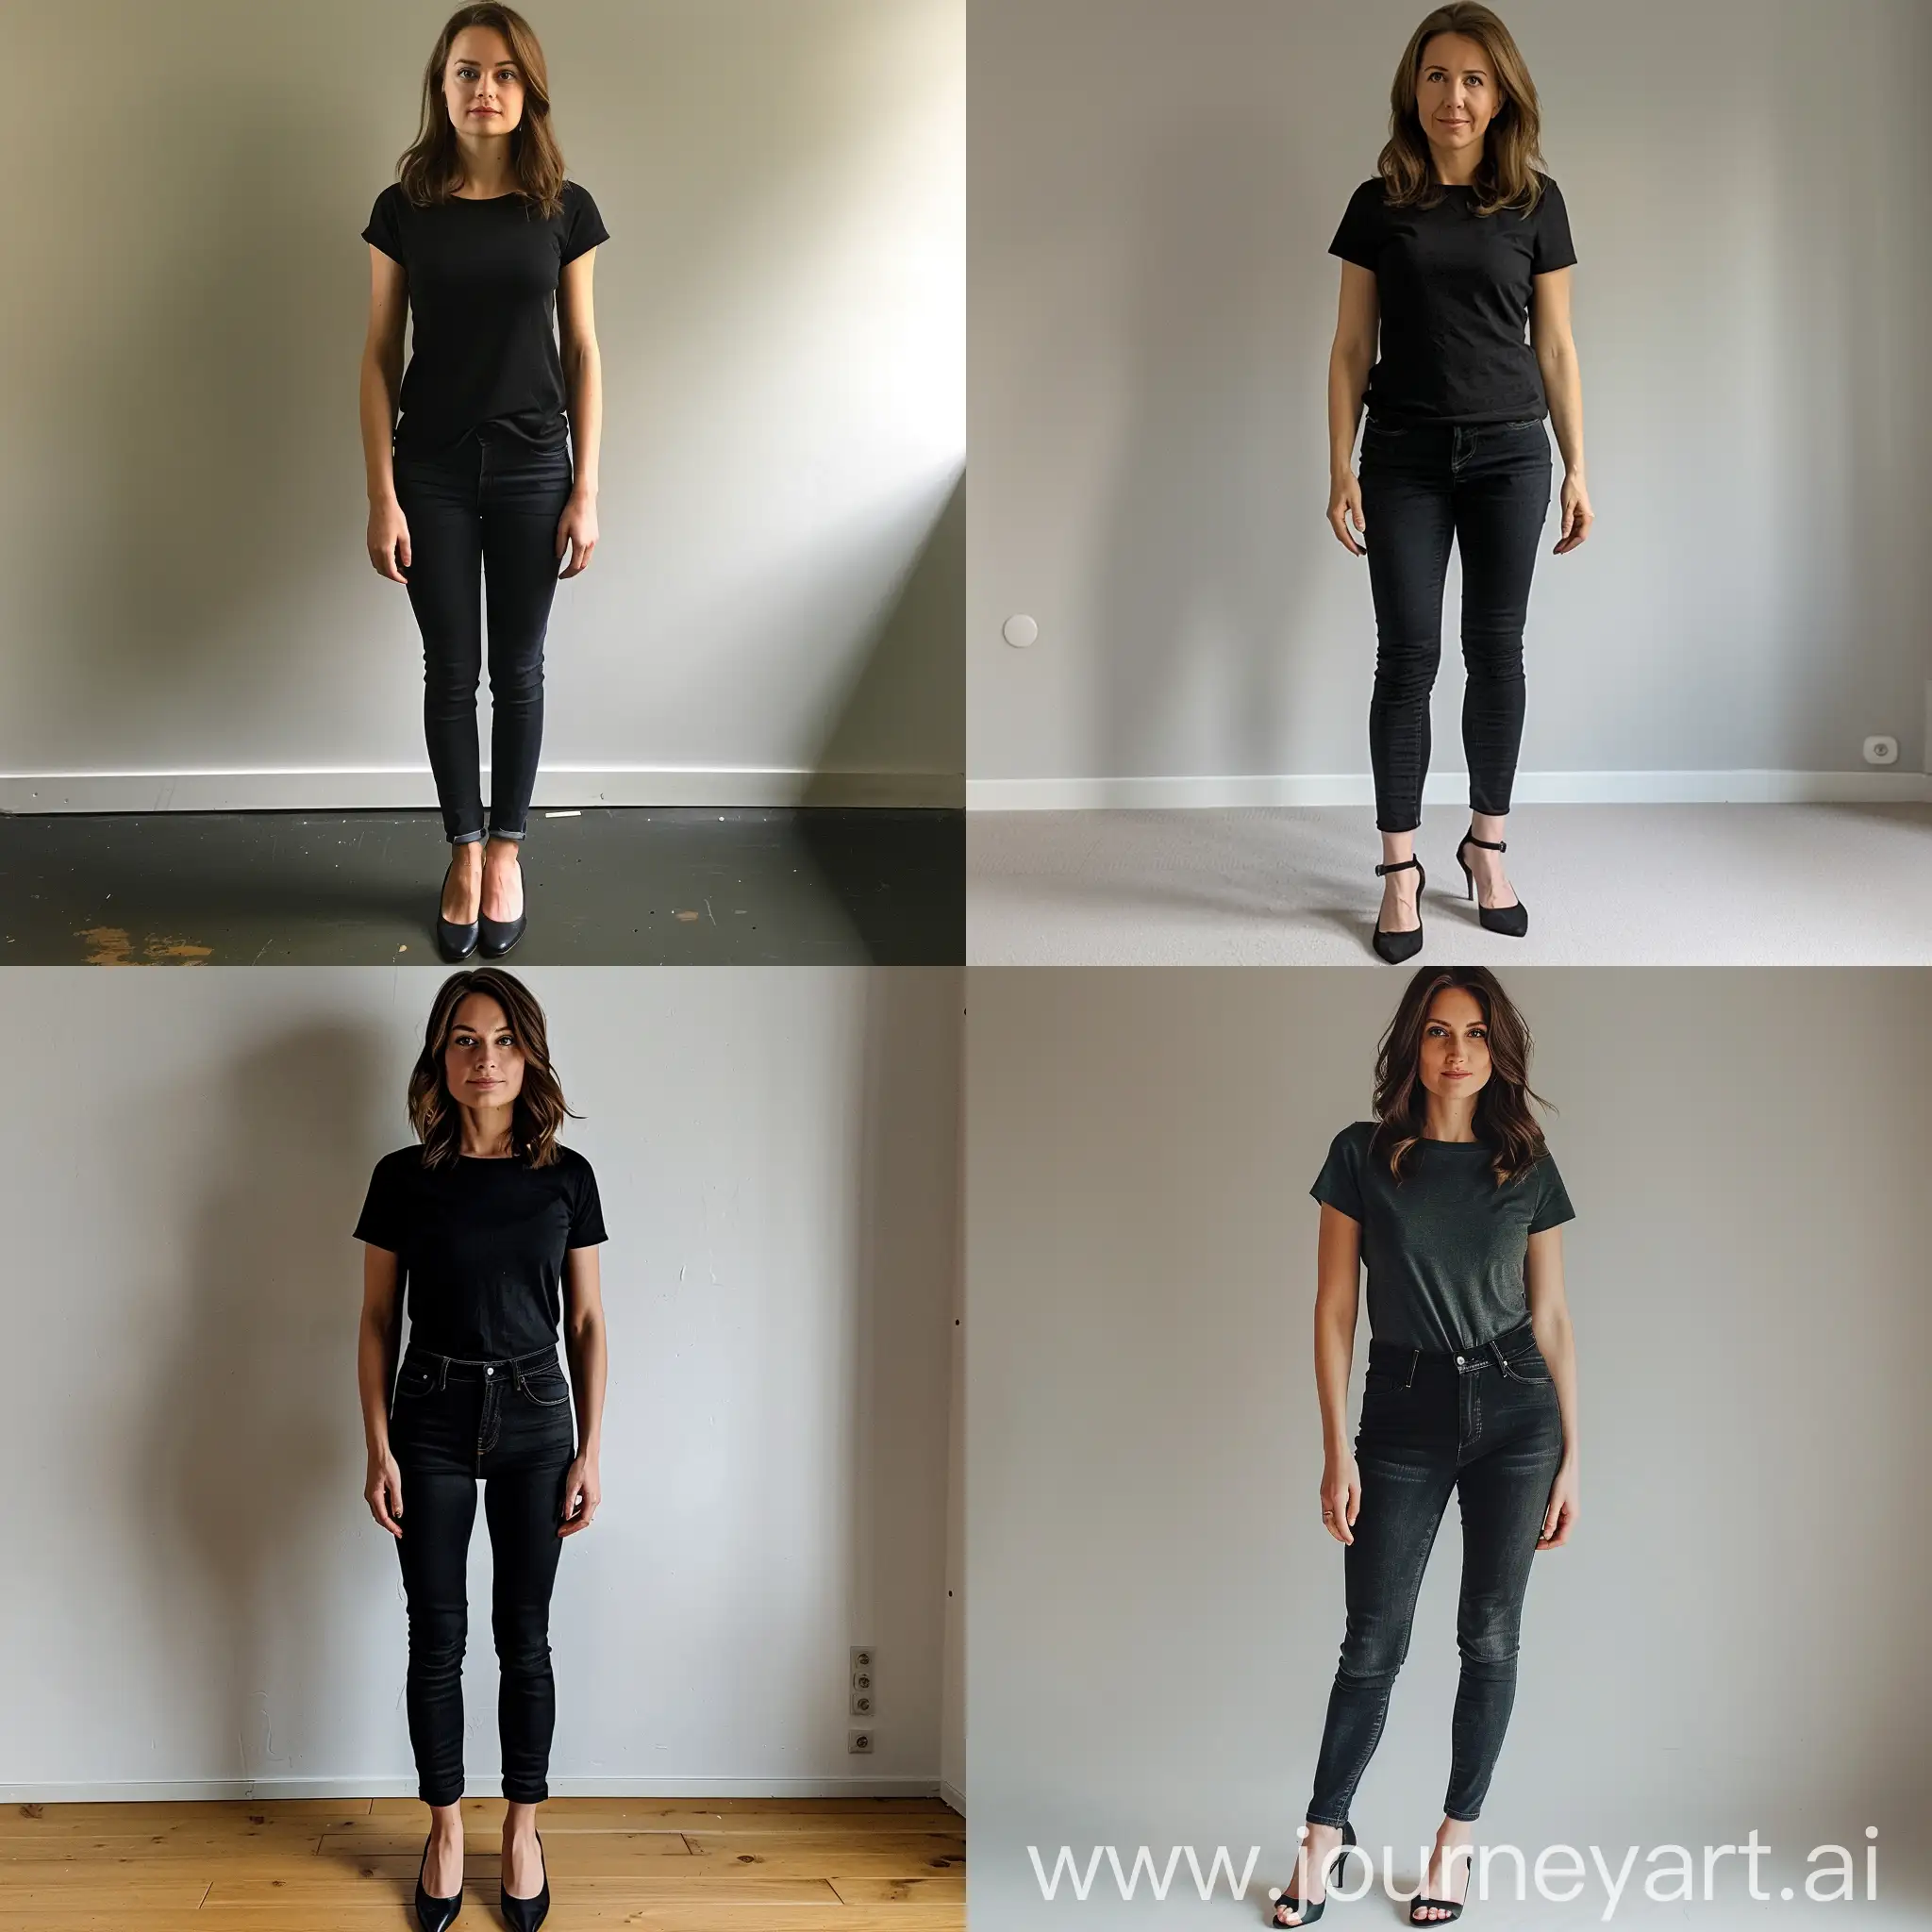 Stylish-Woman-in-Casual-Black-TShirt-and-Jeans-with-High-Heels